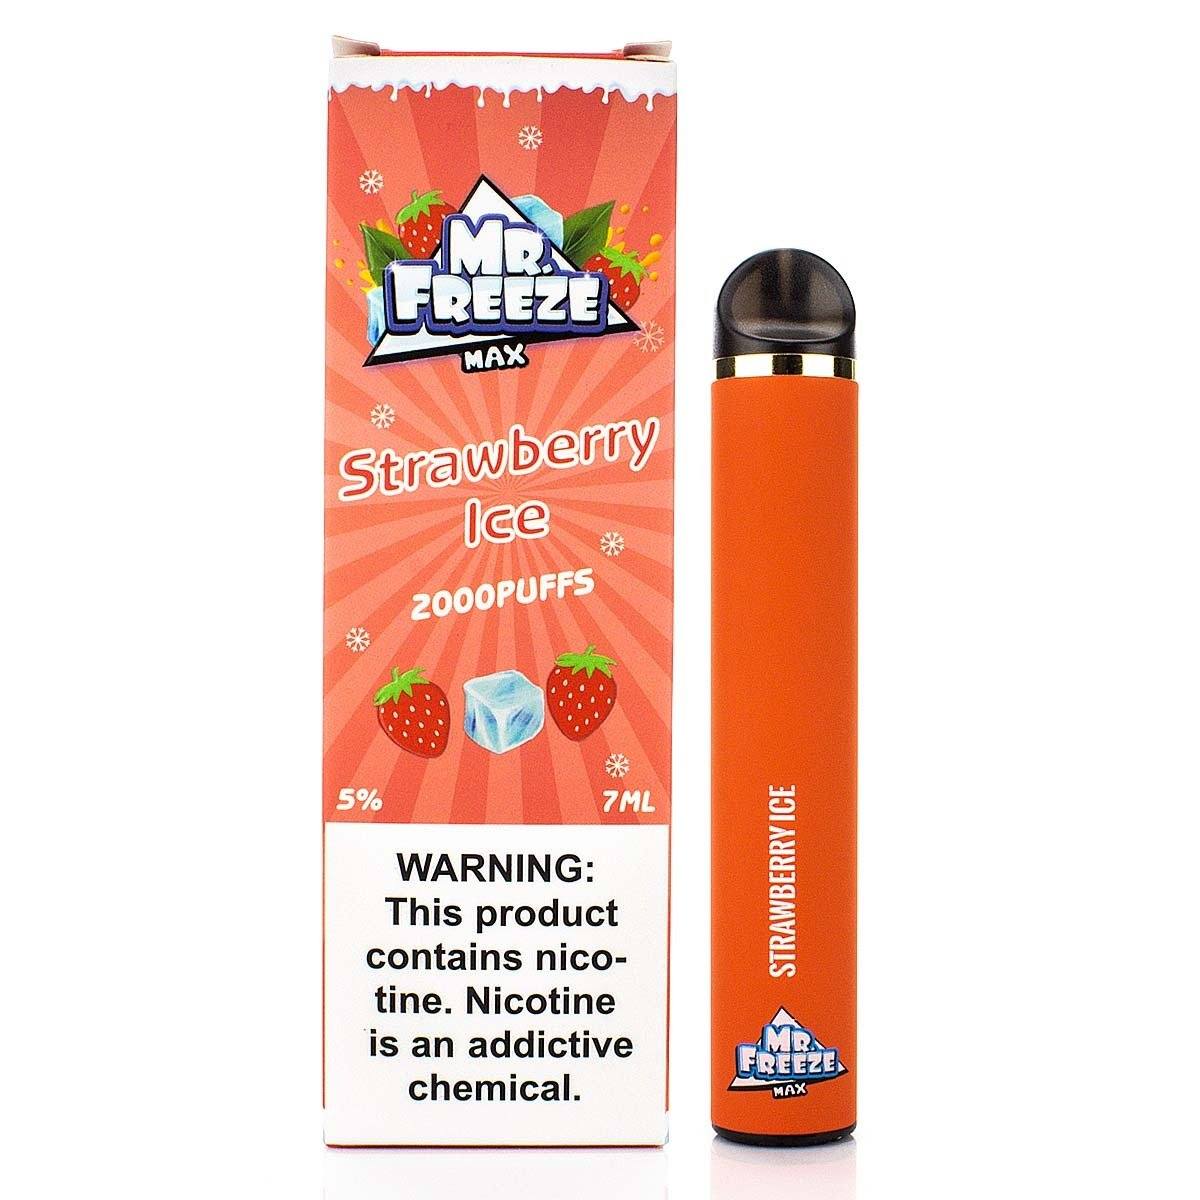 Mr. Freeze Max Disposable Device 5% (Individual) - 2000 Puffs Strawberry Ice with packaging